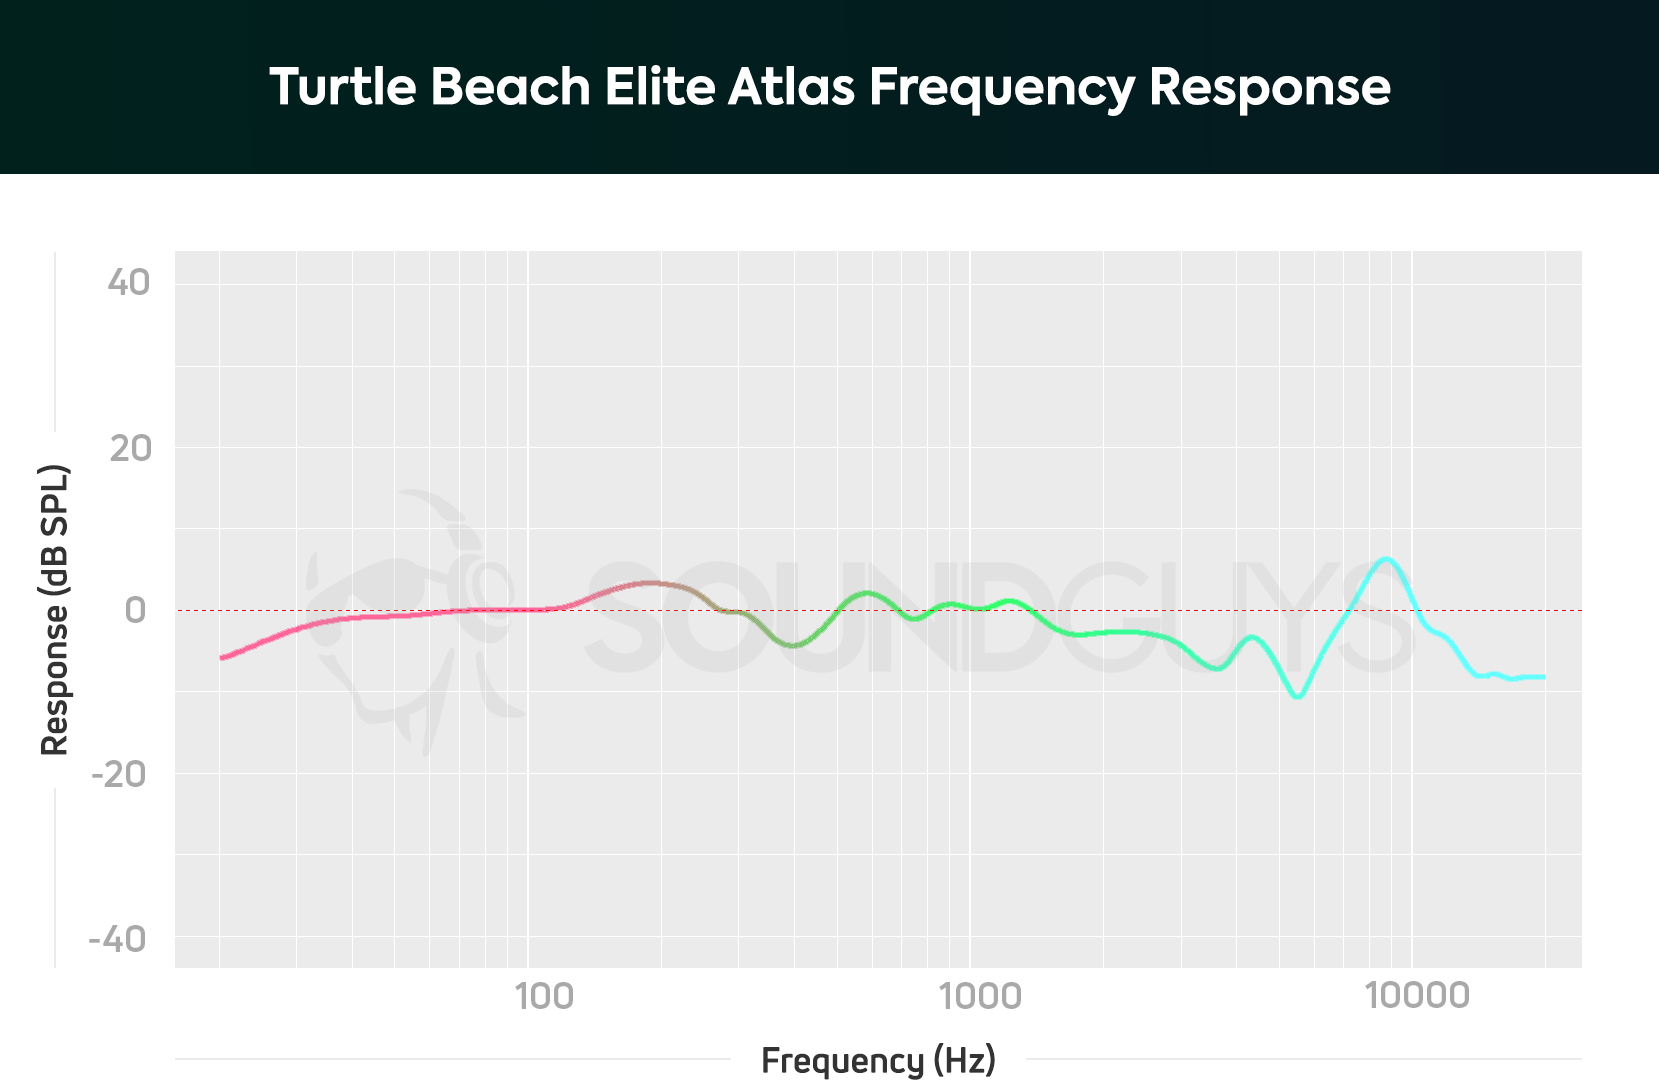 A frequency response chart for The Turtle Beach Elite Atlas gaming headset, which shows accurate audio output across most of the frequency spectrum